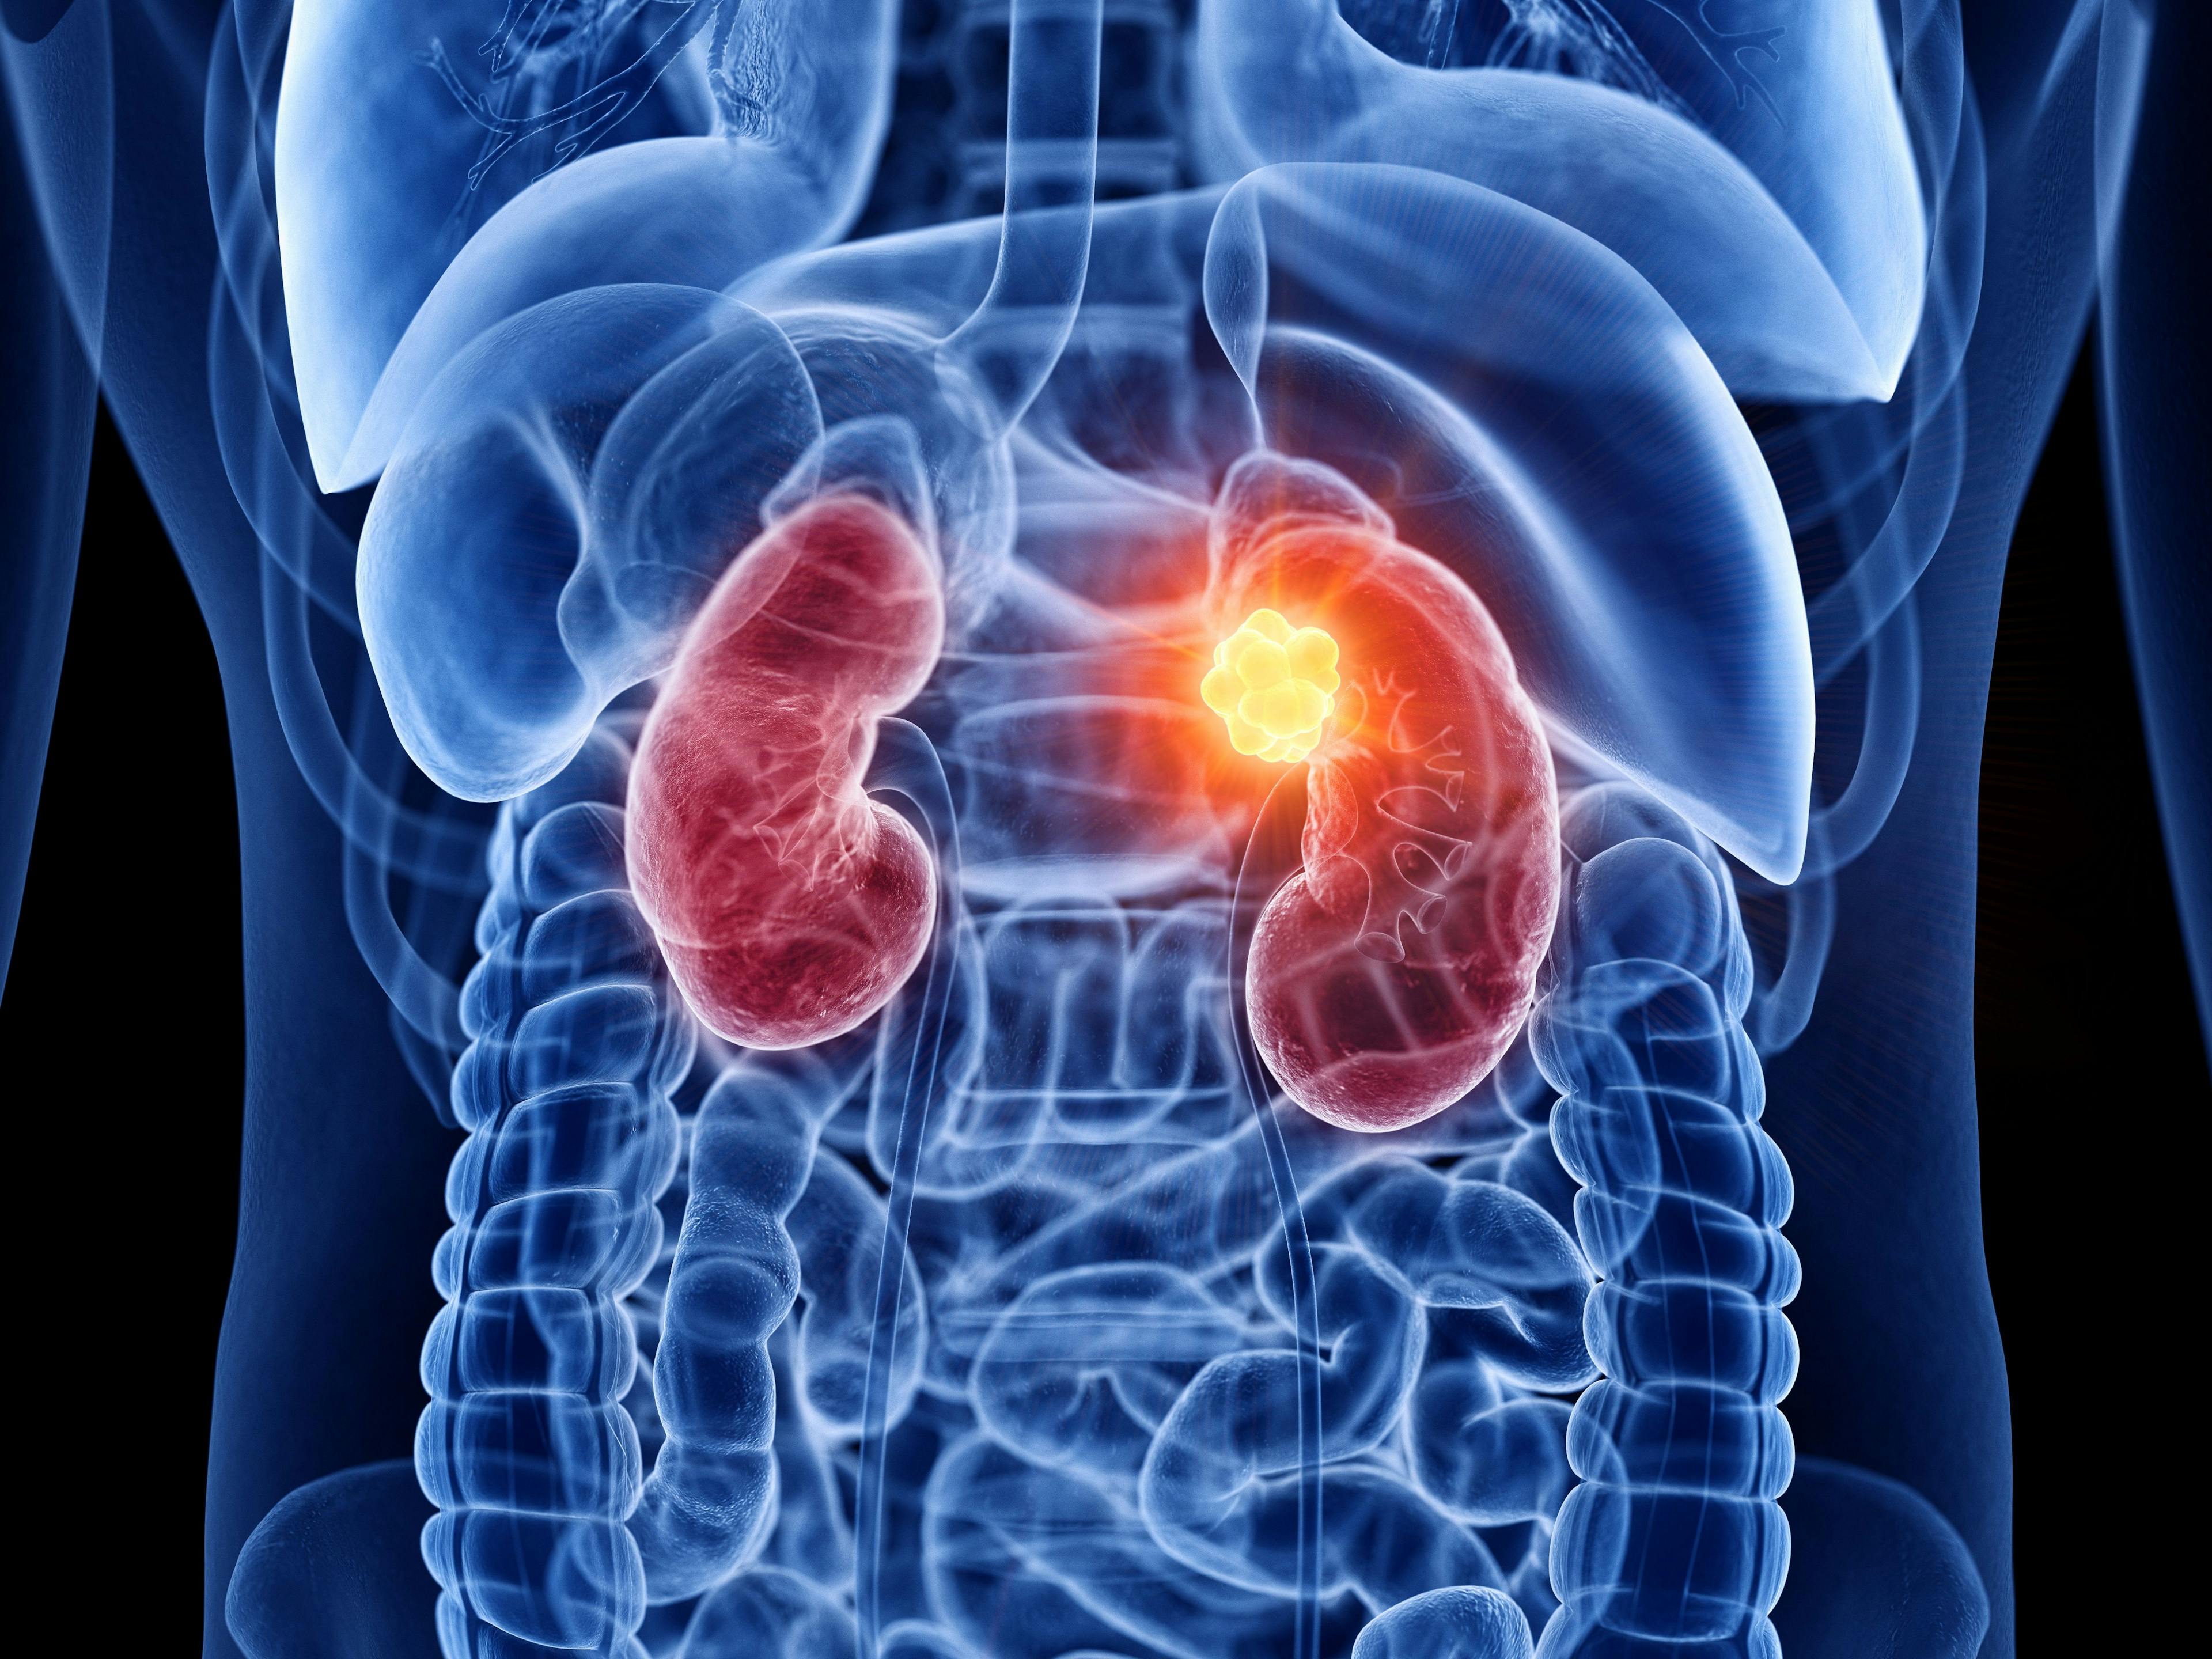 Inaxaplin to treat APOL1-mediated kidney disease moves to phase 3 trial | Image Credit: © Sebastian Kaulitzki - © Sebastian Kaulitzki - stock.adobe.com.